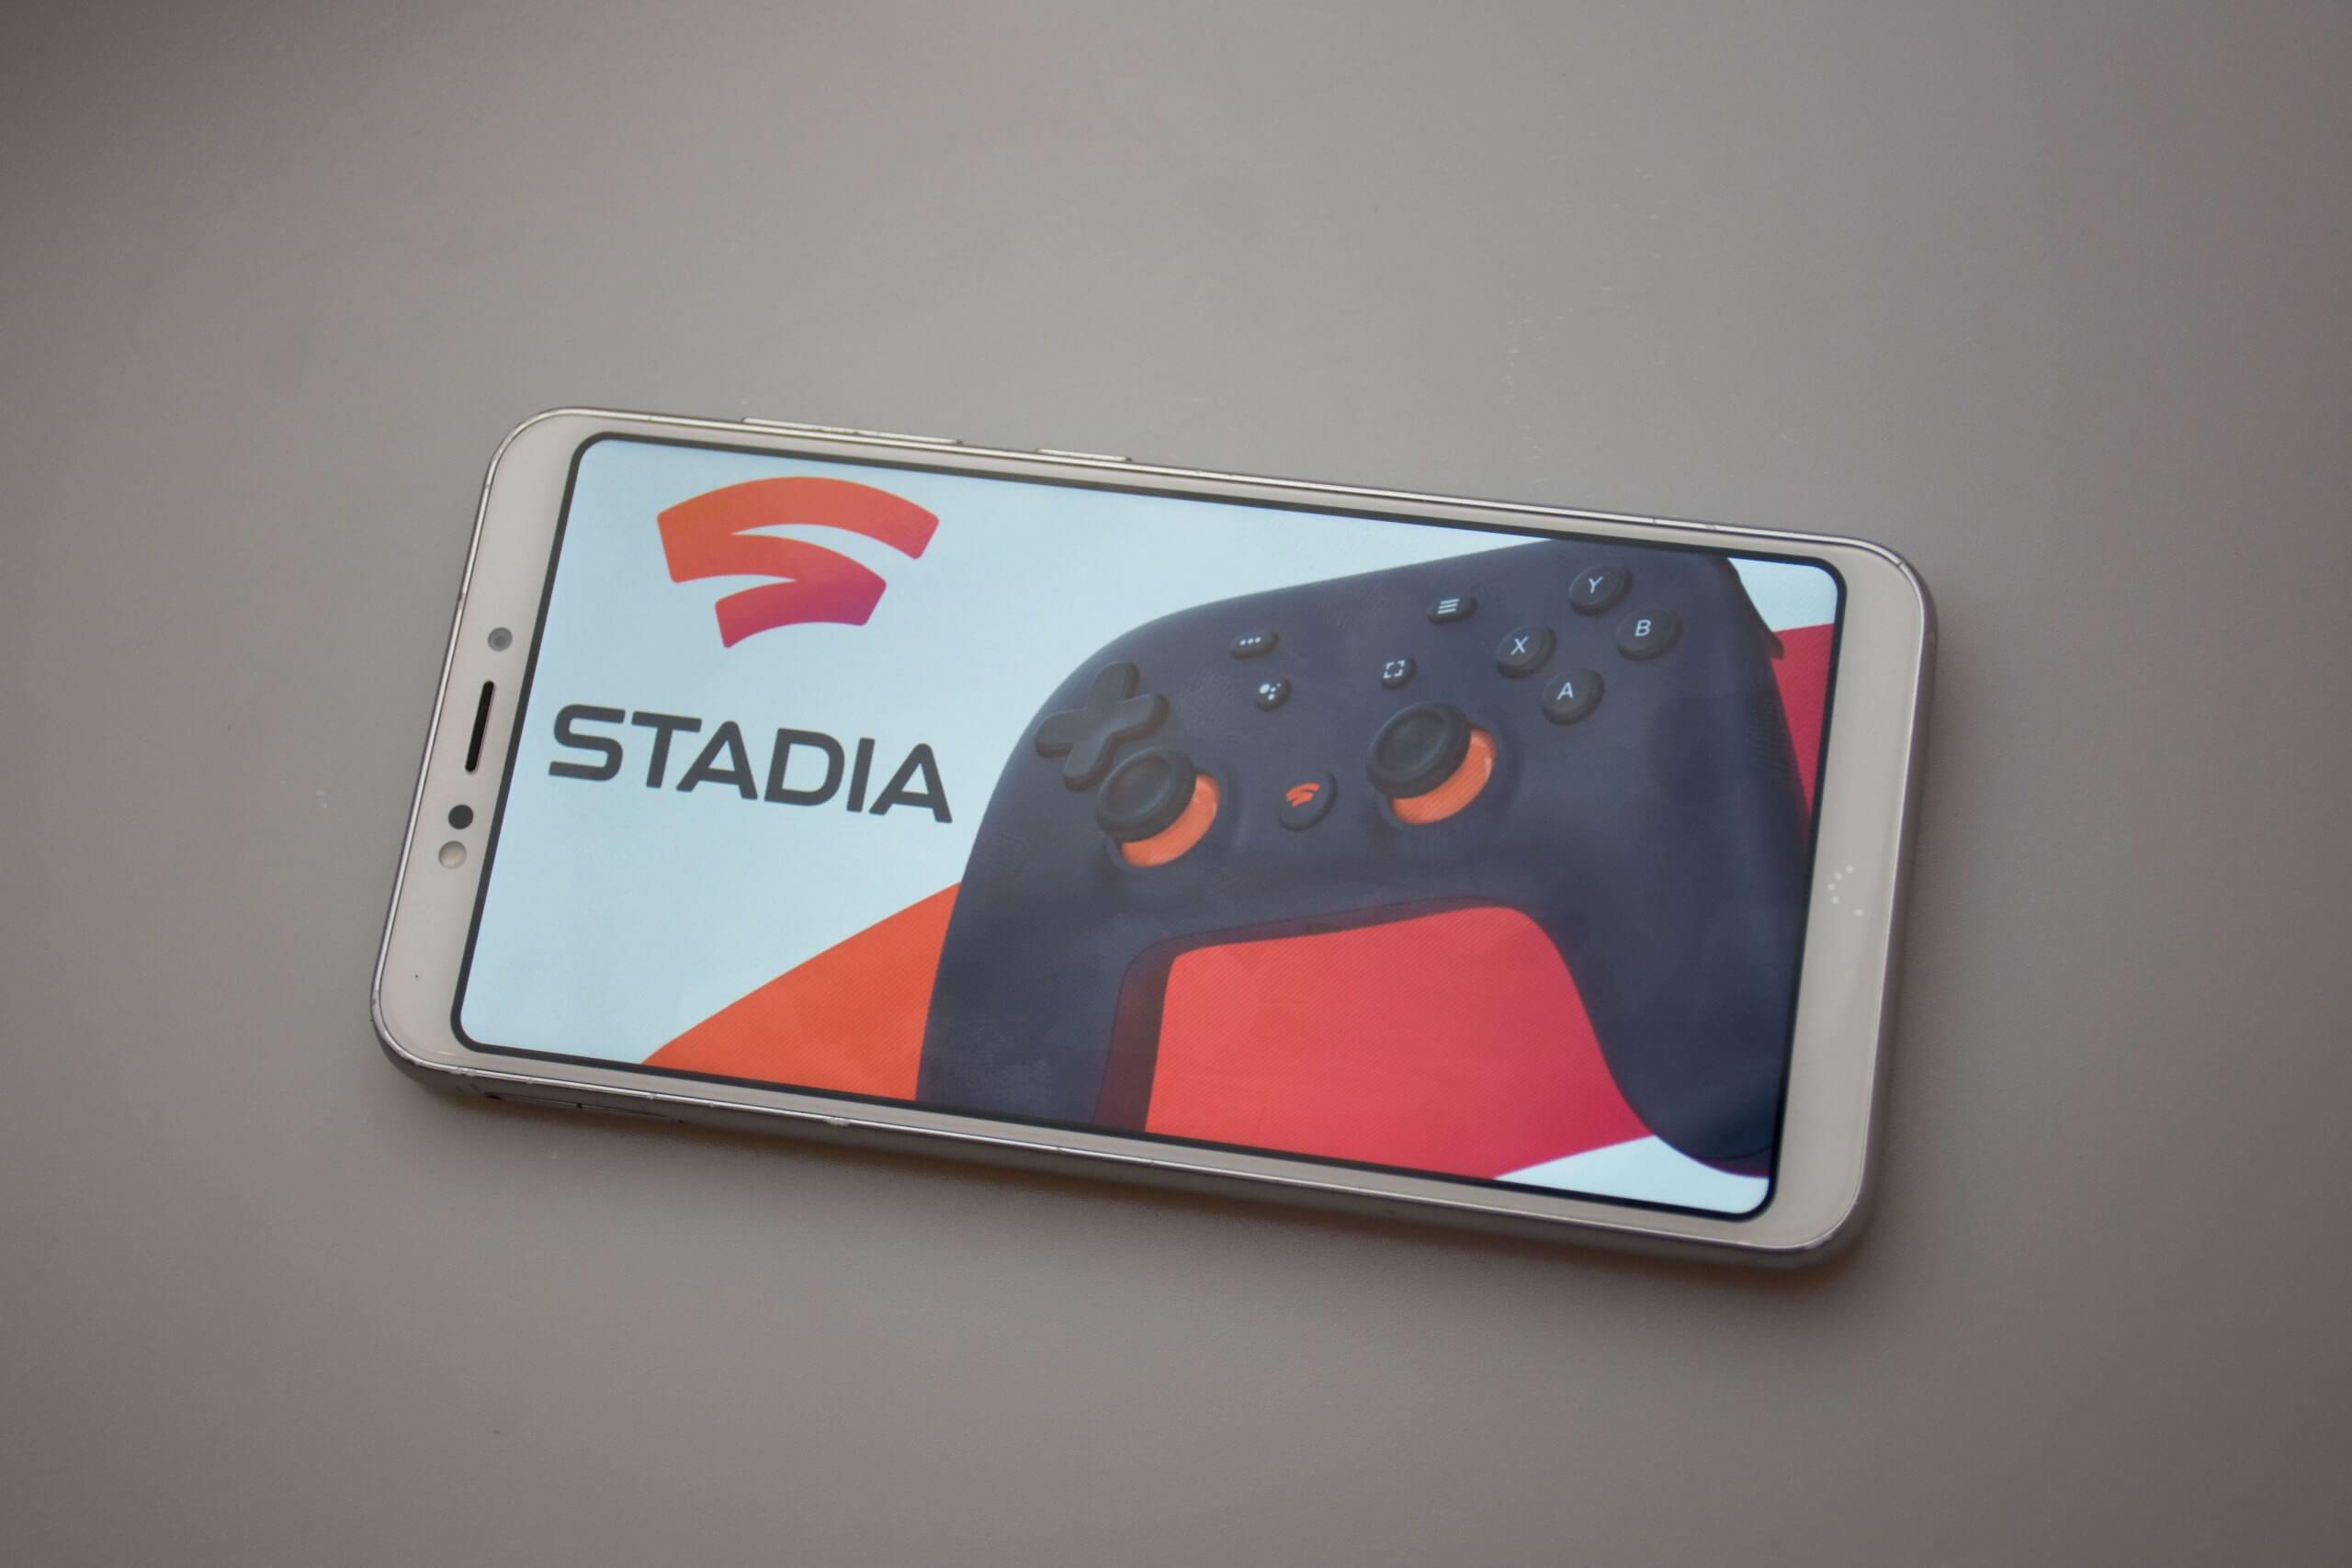 Stadia app available on Google Play Store ahead of imminent launch